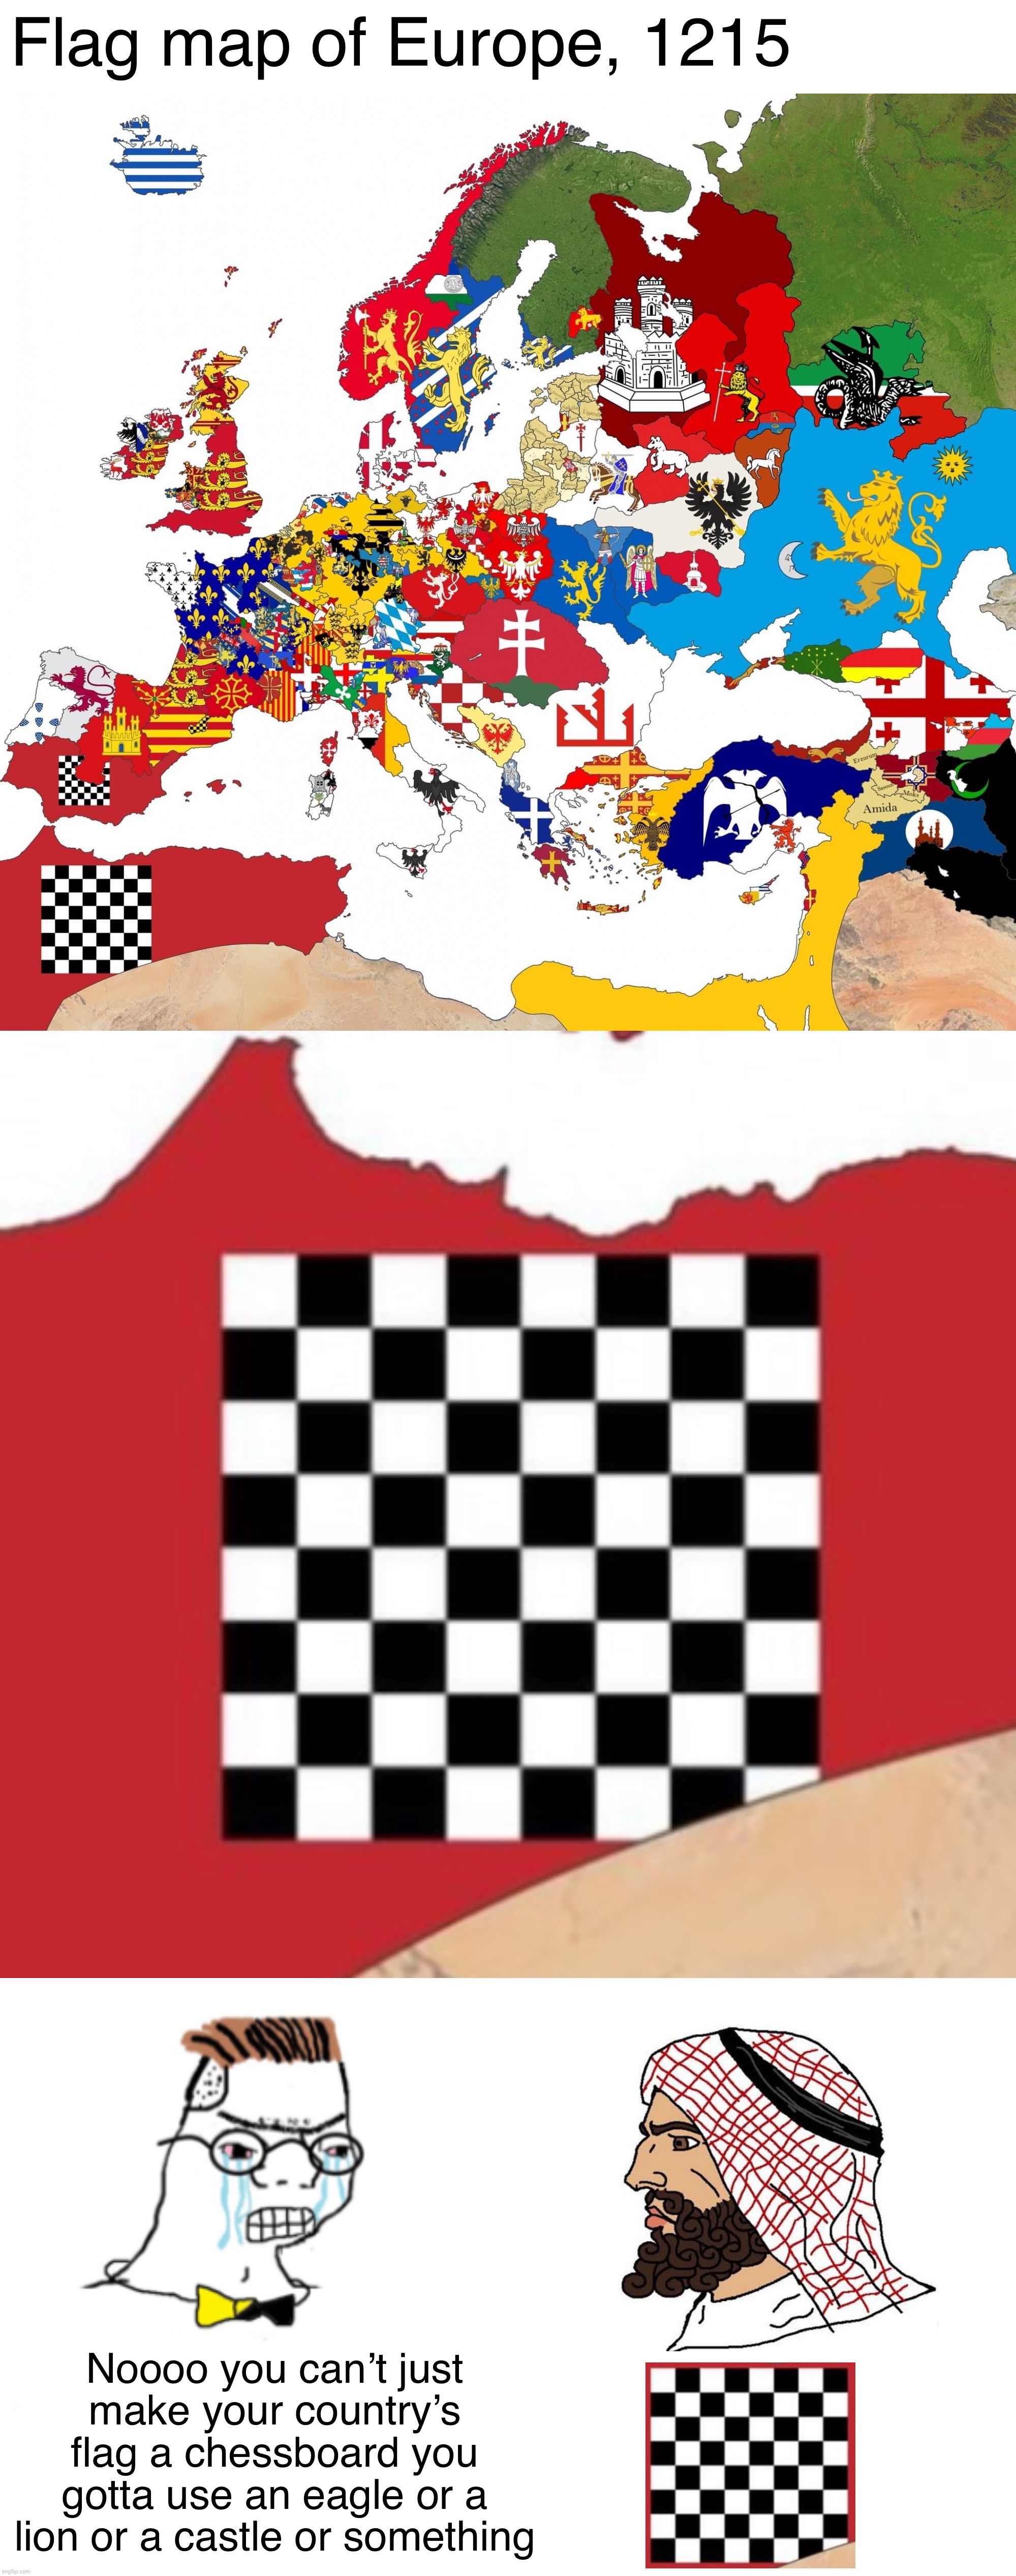 Based beyond belief | Flag map of Europe, 1215; Noooo you can’t just make your country’s flag a chessboard you gotta use an eagle or a lion or a castle or something | image tagged in flag map of europe in 1215,nooo haha go brrr,based,medieval,flag,designs | made w/ Imgflip meme maker